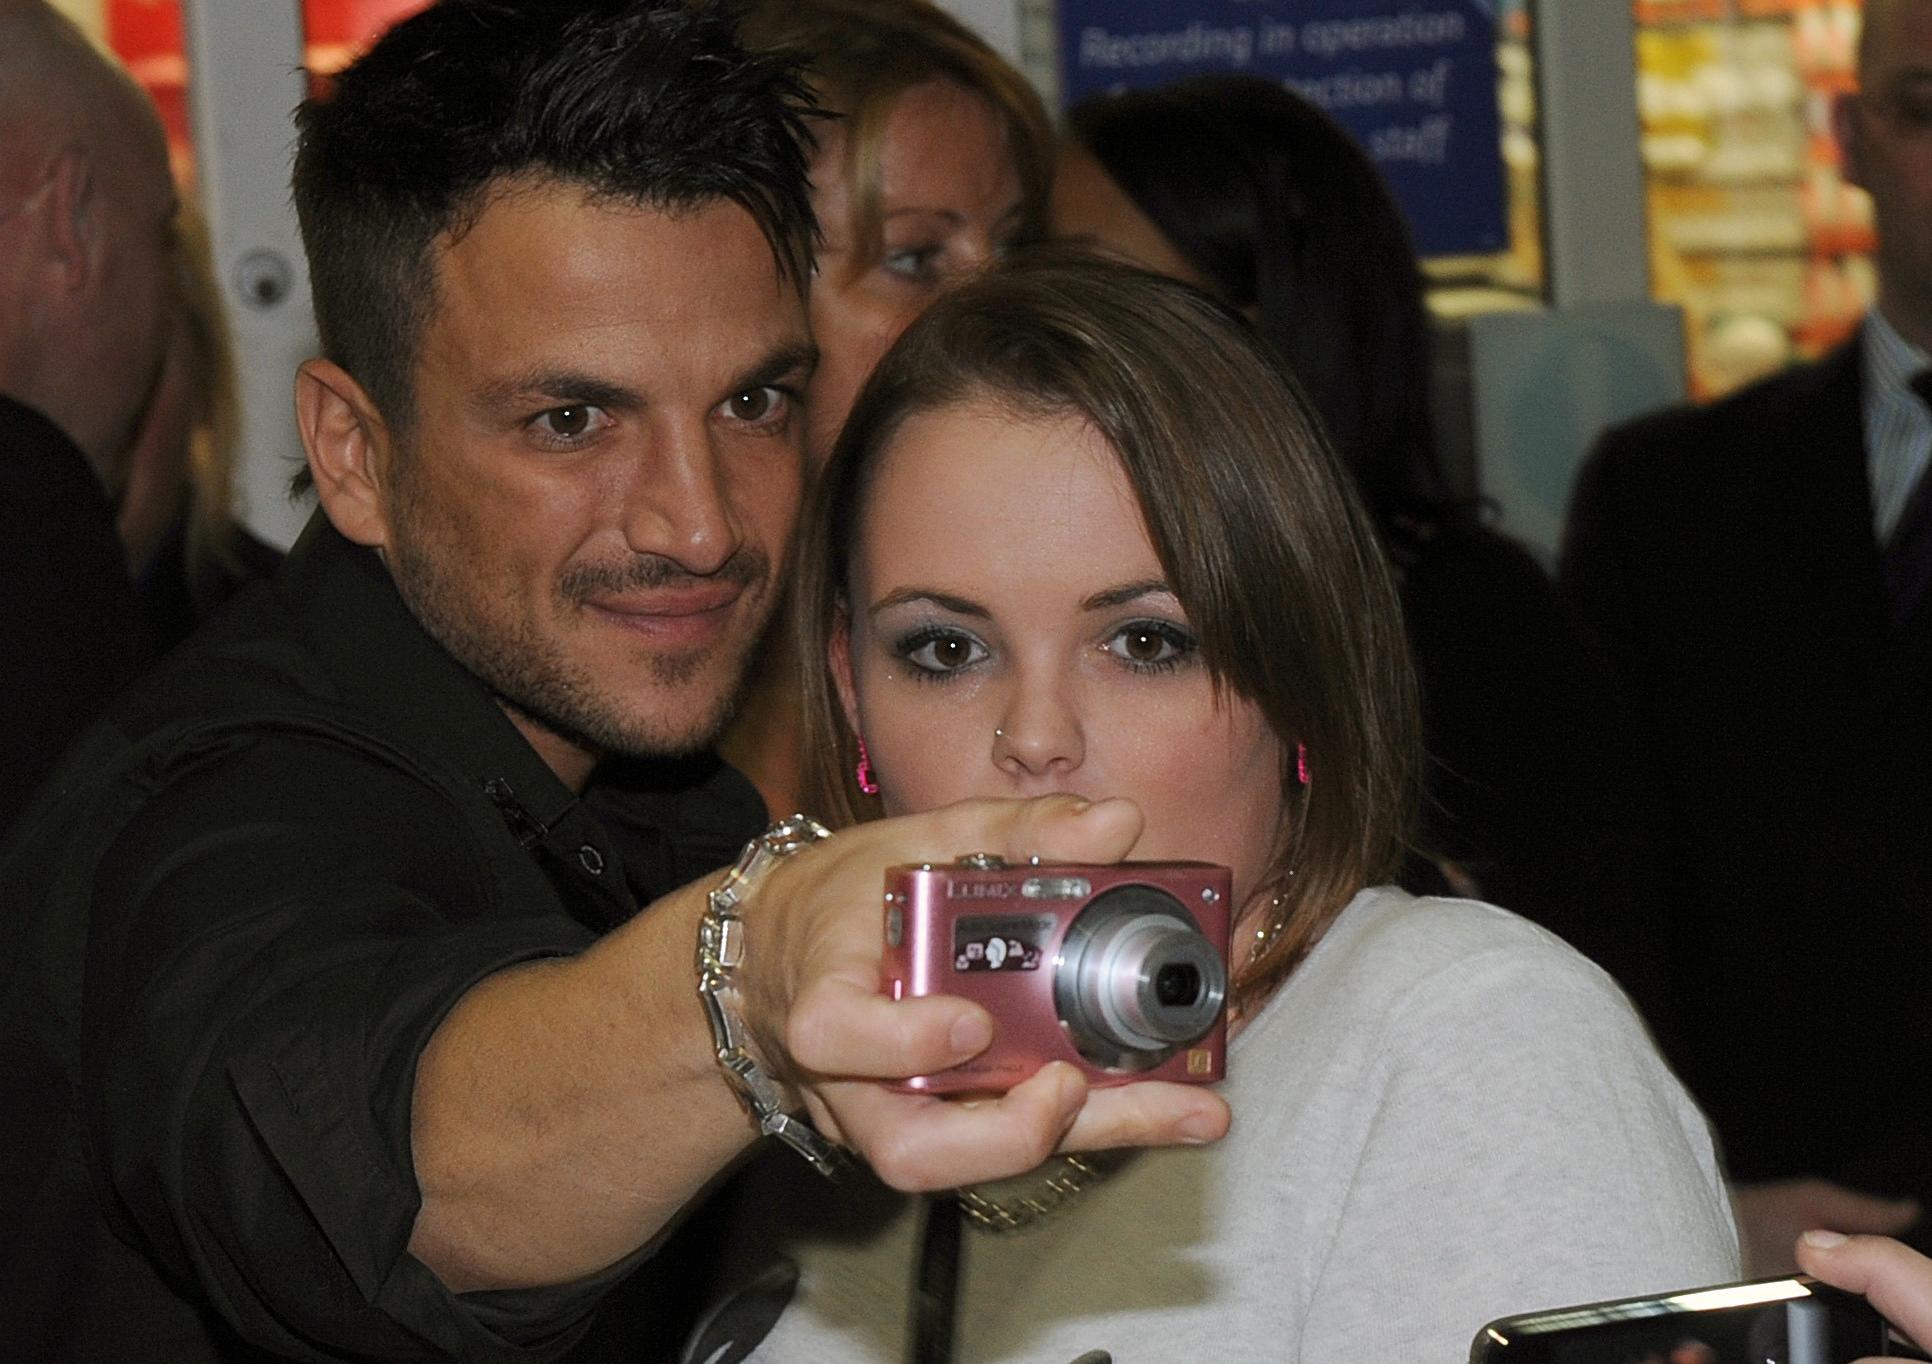 Peter Andre at the Holmbush Shopping centre. Picture by Stephen Goodger